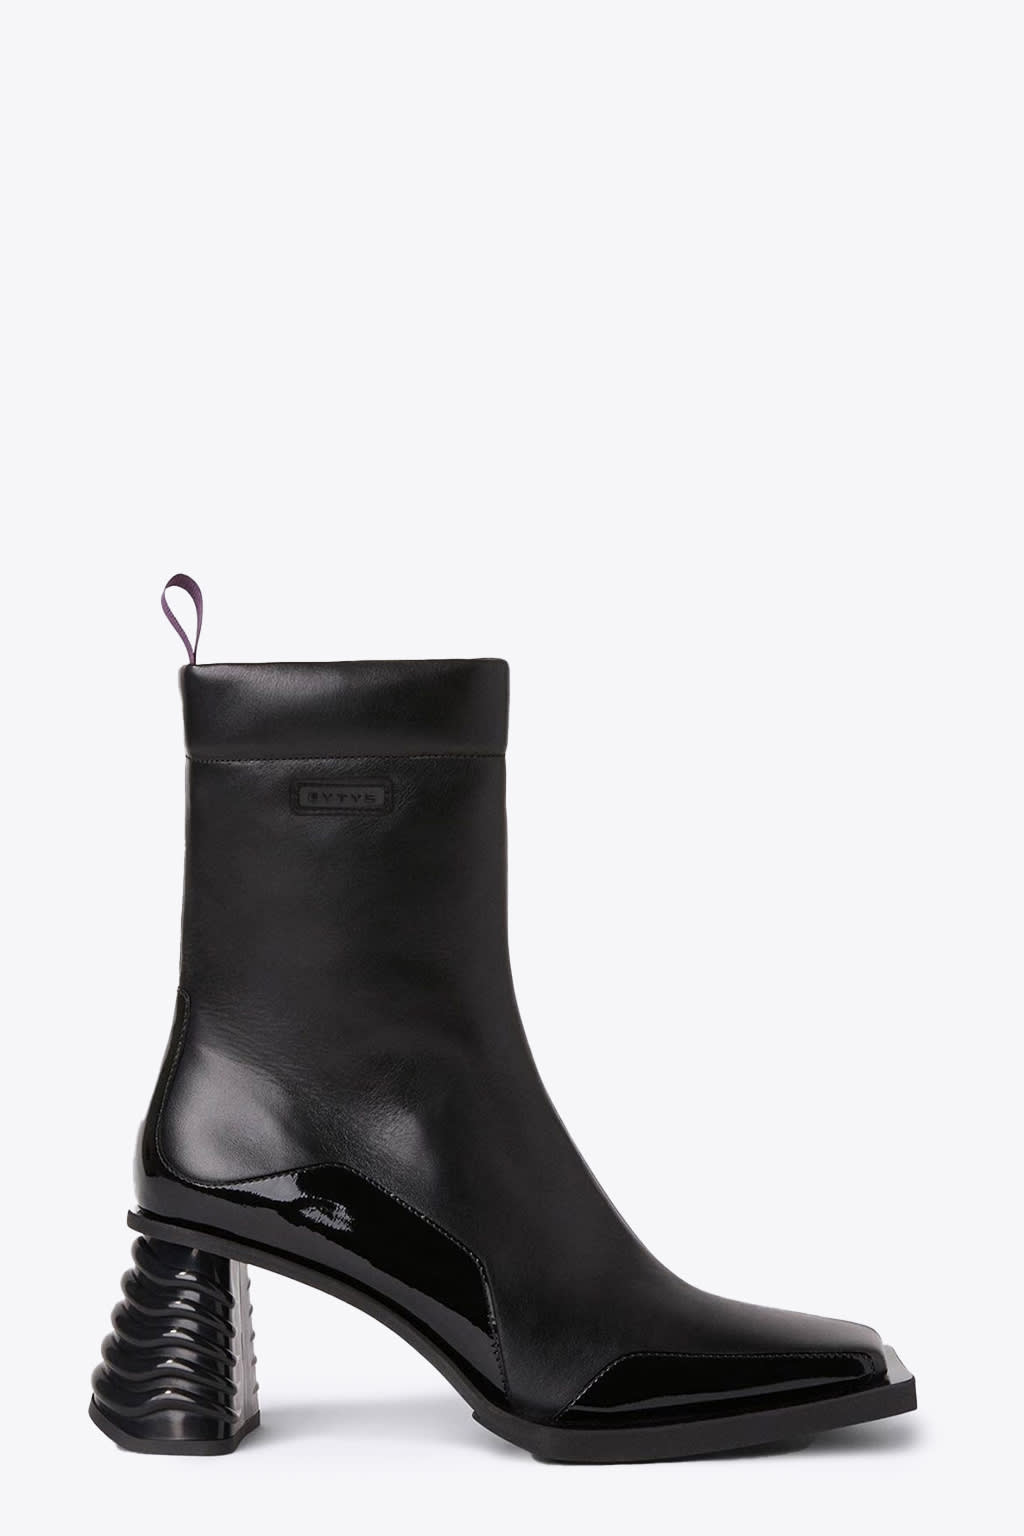 Eytys Gaia Black leather ankle boots with squared toe - Gaia